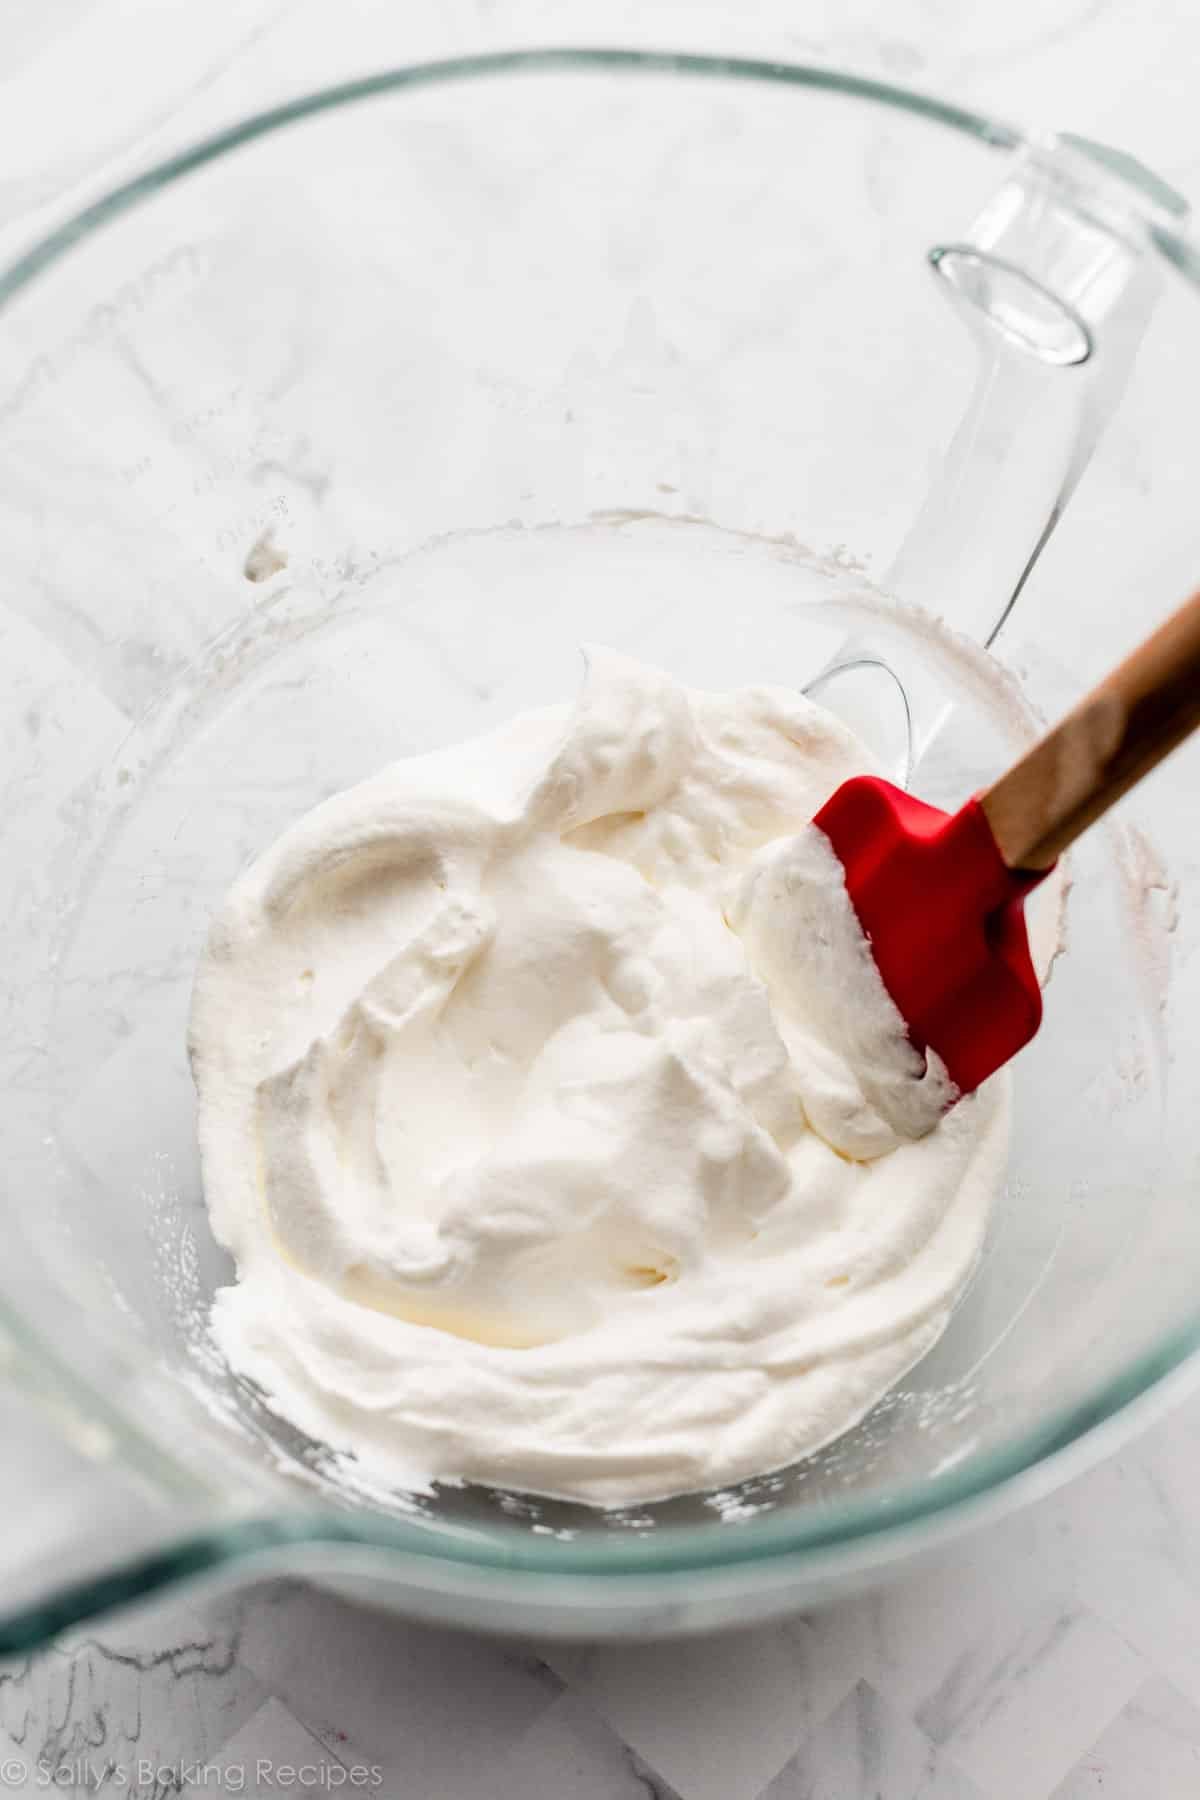 whipped cream and red spatula in glass bowl.